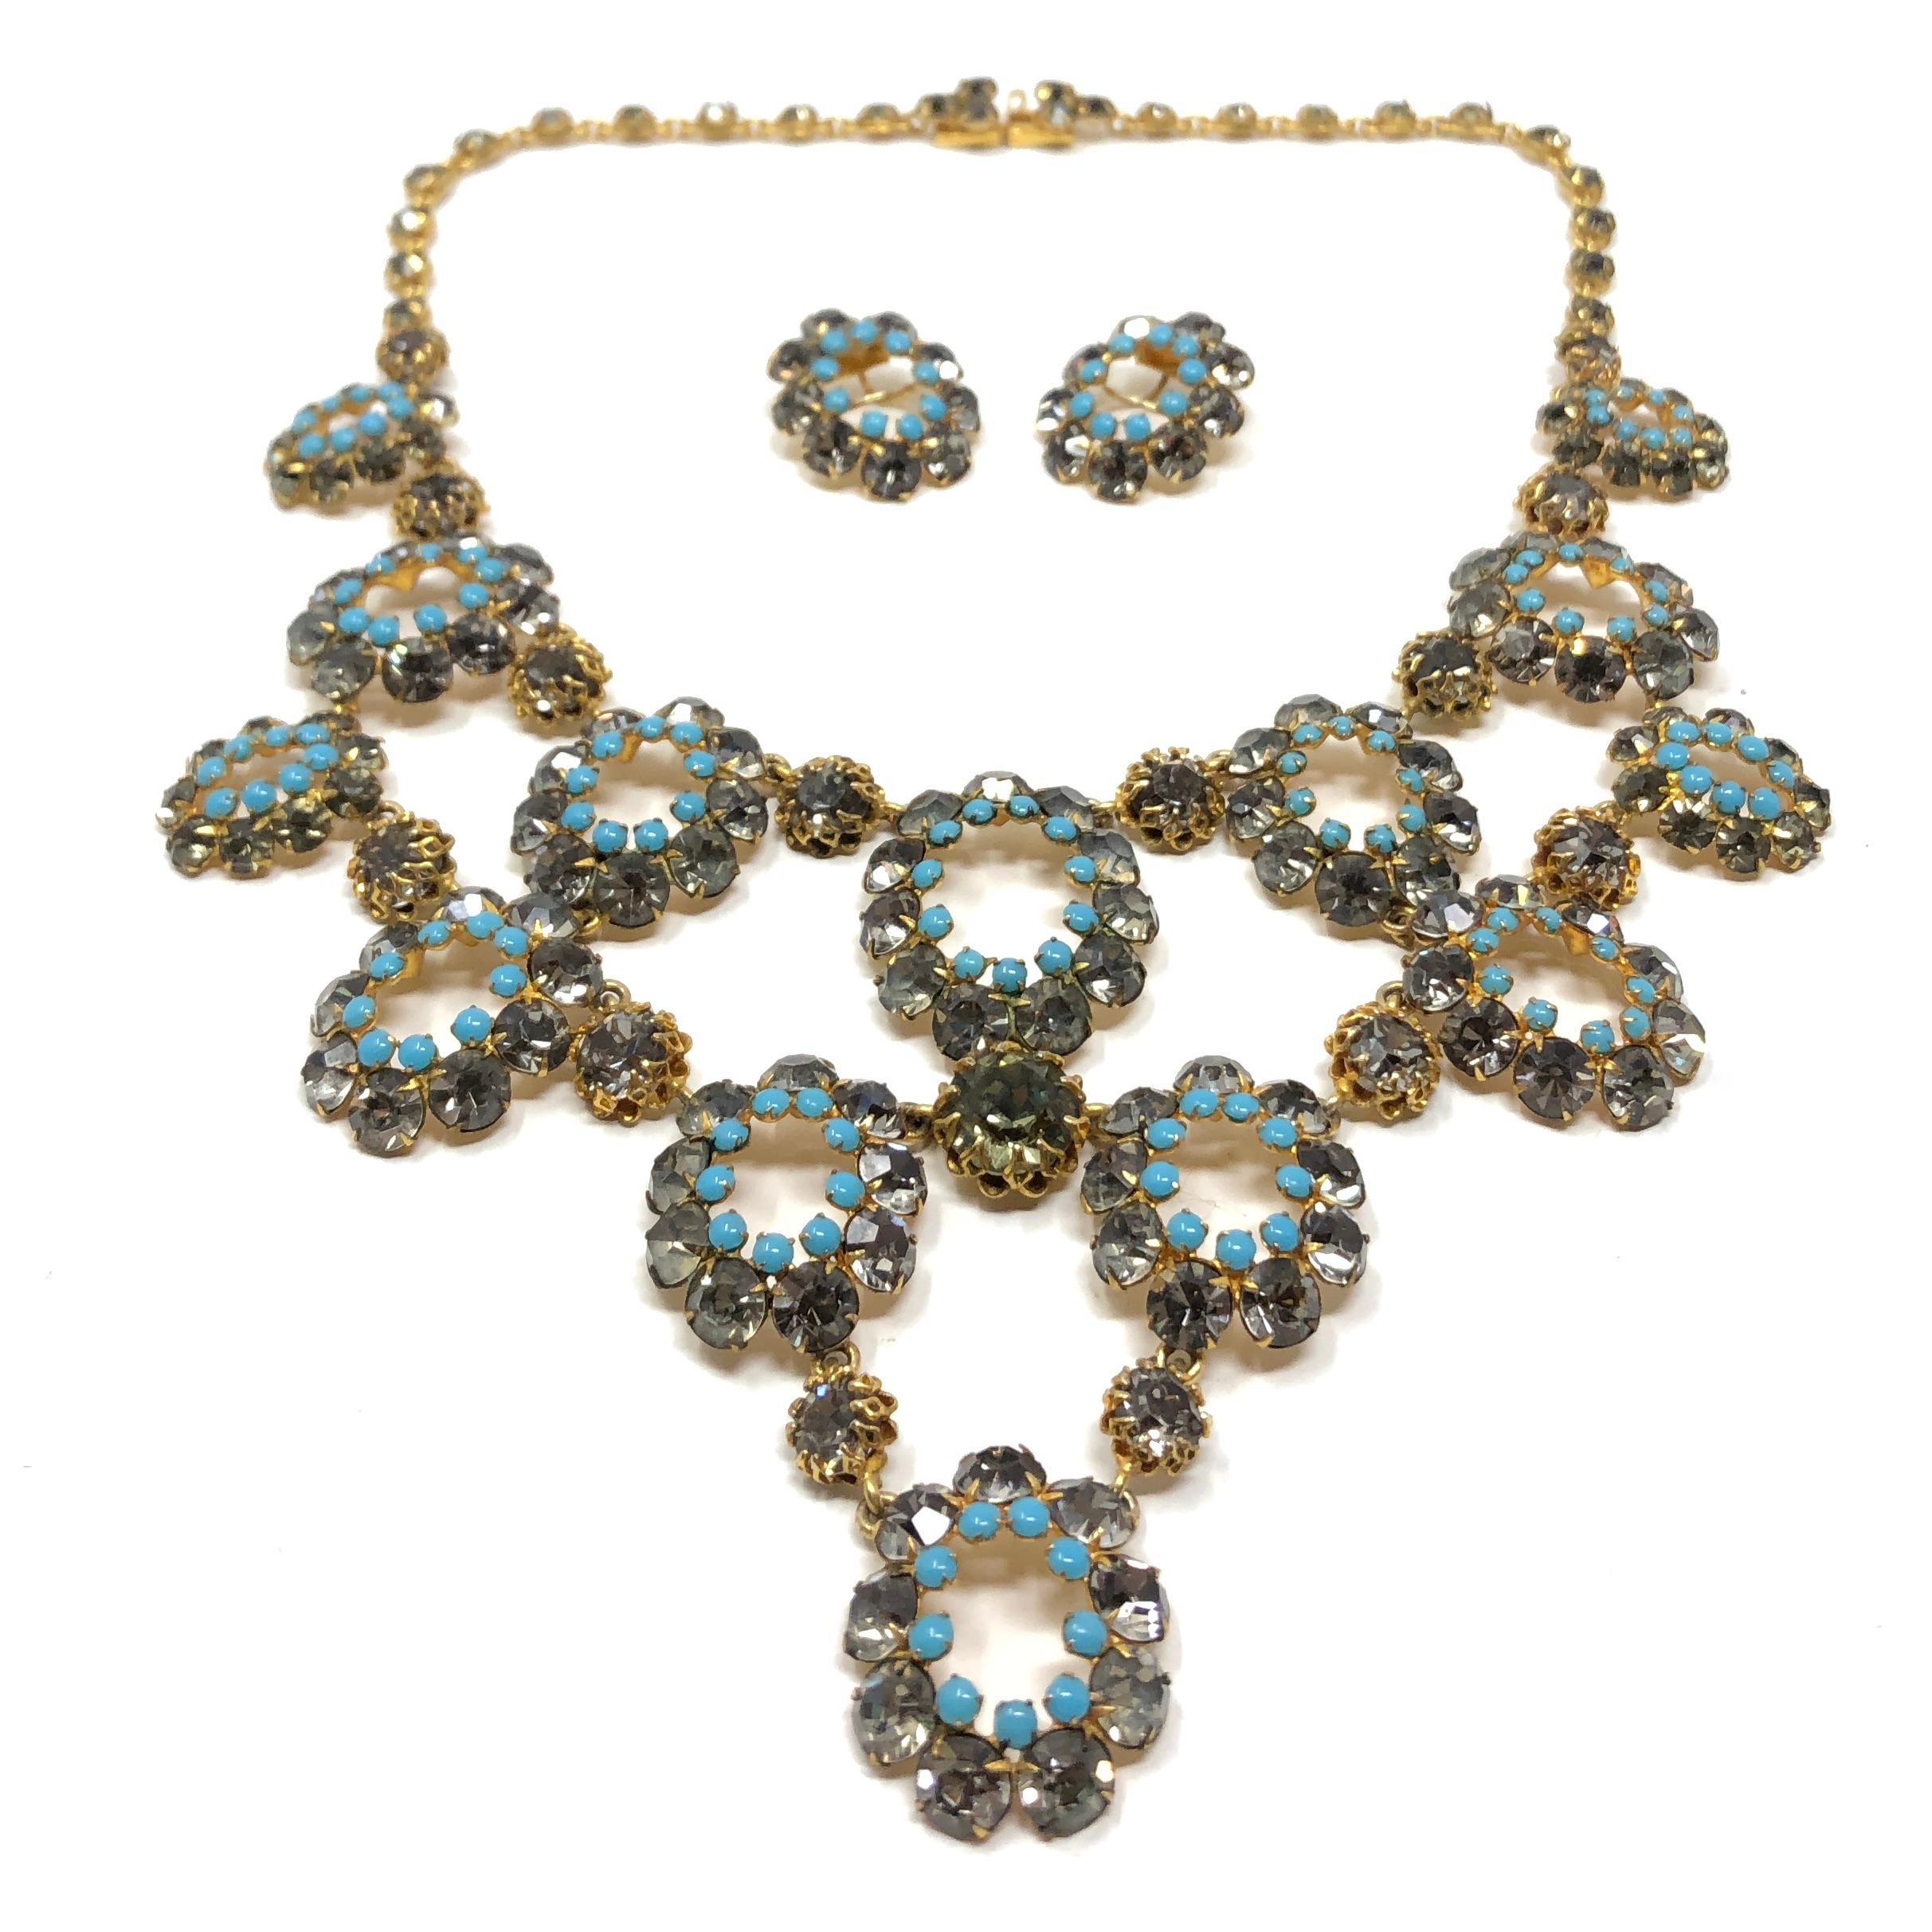 Women's 1950s French Couture Turquoise Glass and Grey Rhinestone Vintage Necklace and Ea